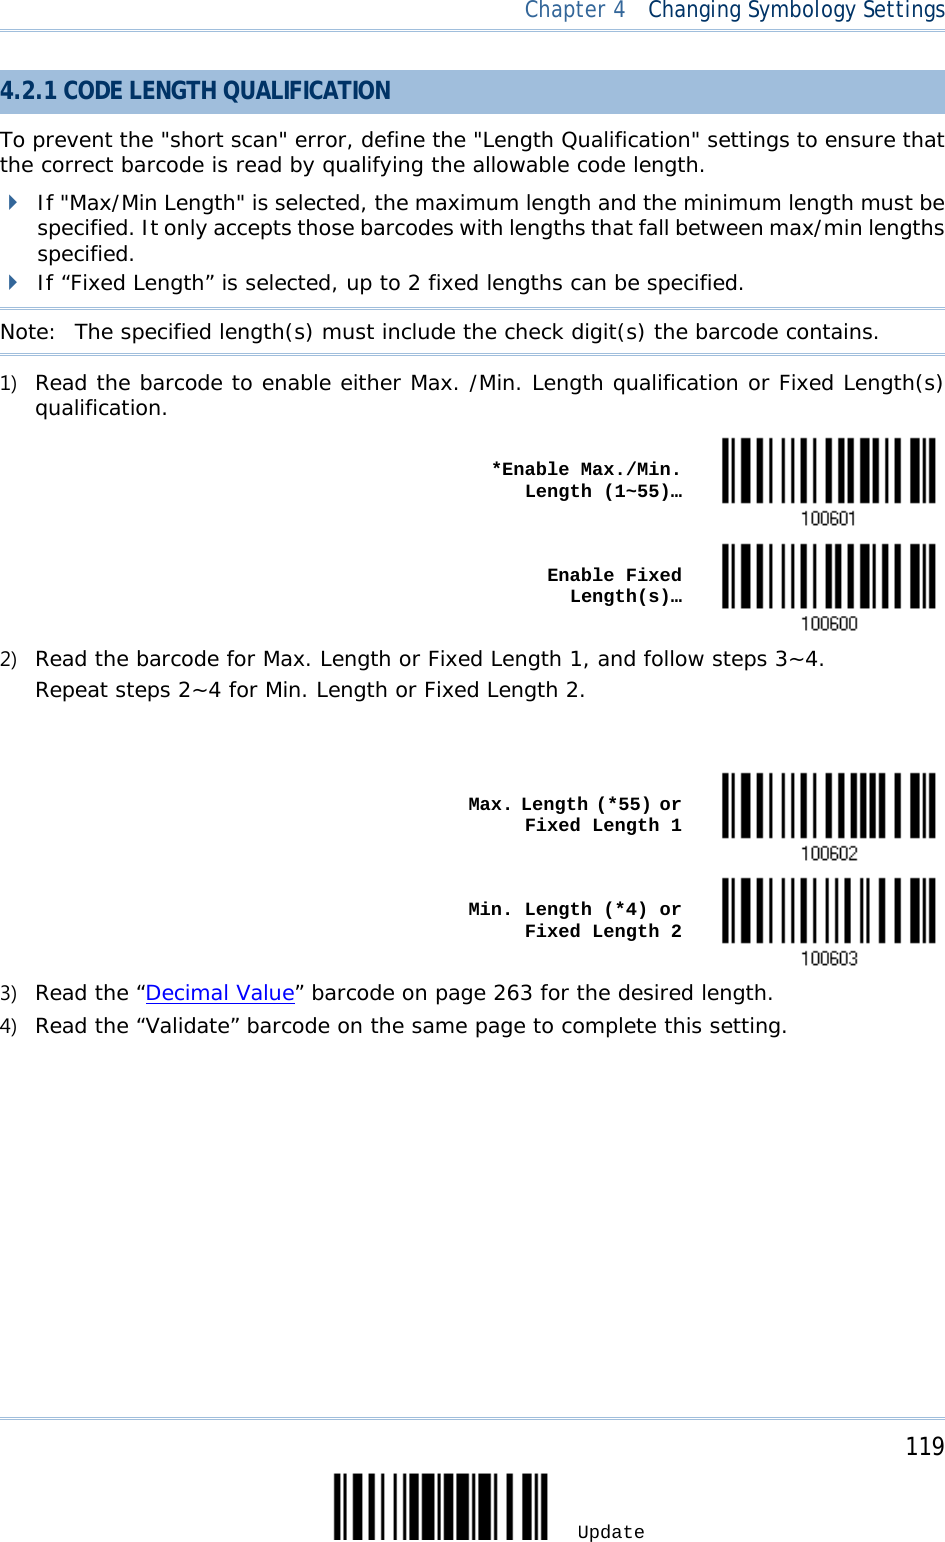  Chapter 4  Changing Symbology Settings  4.2.1 CODE LENGTH QUALIFICATION To prevent the &quot;short scan&quot; error, define the &quot;Length Qualification&quot; settings to ensure that the correct barcode is read by qualifying the allowable code length.  If &quot;Max/Min Length&quot; is selected, the maximum length and the minimum length must be specified. It only accepts those barcodes with lengths that fall between max/min lengths specified.  If “Fixed Length” is selected, up to 2 fixed lengths can be specified. Note:   The specified length(s) must include the check digit(s) the barcode contains. 1) Read the barcode to enable either Max. /Min. Length qualification or Fixed Length(s) qualification.    *Enable Max./Min. Length (1~55)…     Enable Fixed Length(s)…  2) Read the barcode for Max. Length or Fixed Length 1, and follow steps 3~4. Repeat steps 2~4 for Min. Length or Fixed Length 2.      Max. Length (*55) or Fixed Length 1     Min. Length (*4) or Fixed Length 2  3) Read the “Decimal Value” barcode on page 263 for the desired length.  4) Read the “Validate” barcode on the same page to complete this setting.     119 Update 